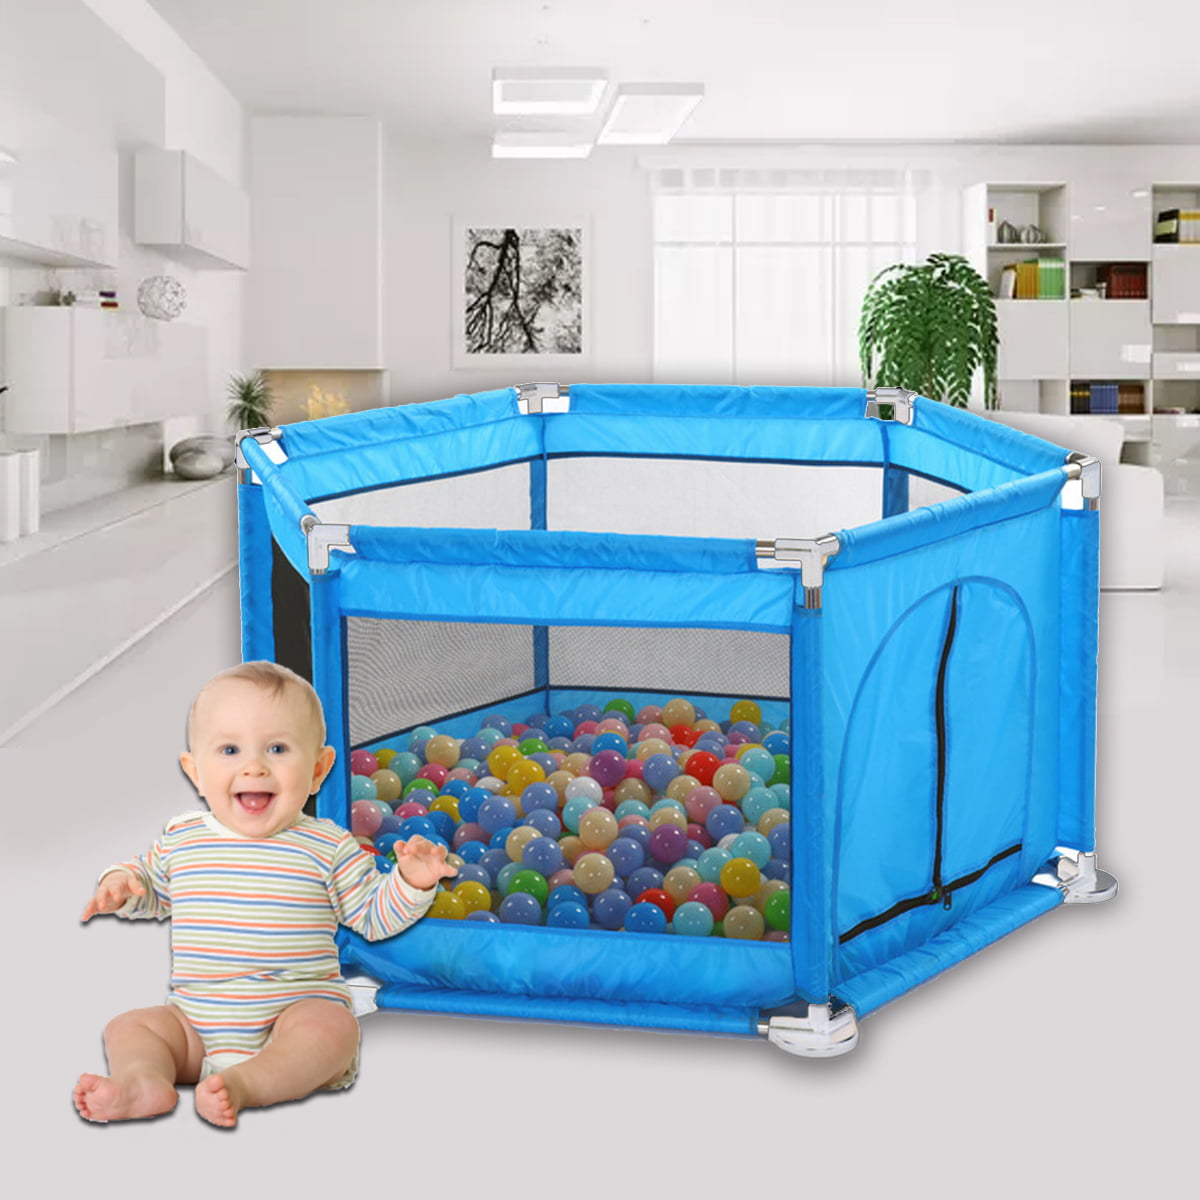 Toddler Indoor Safety Play Tent Baby Kid Portable Folding Playpen Game House New 